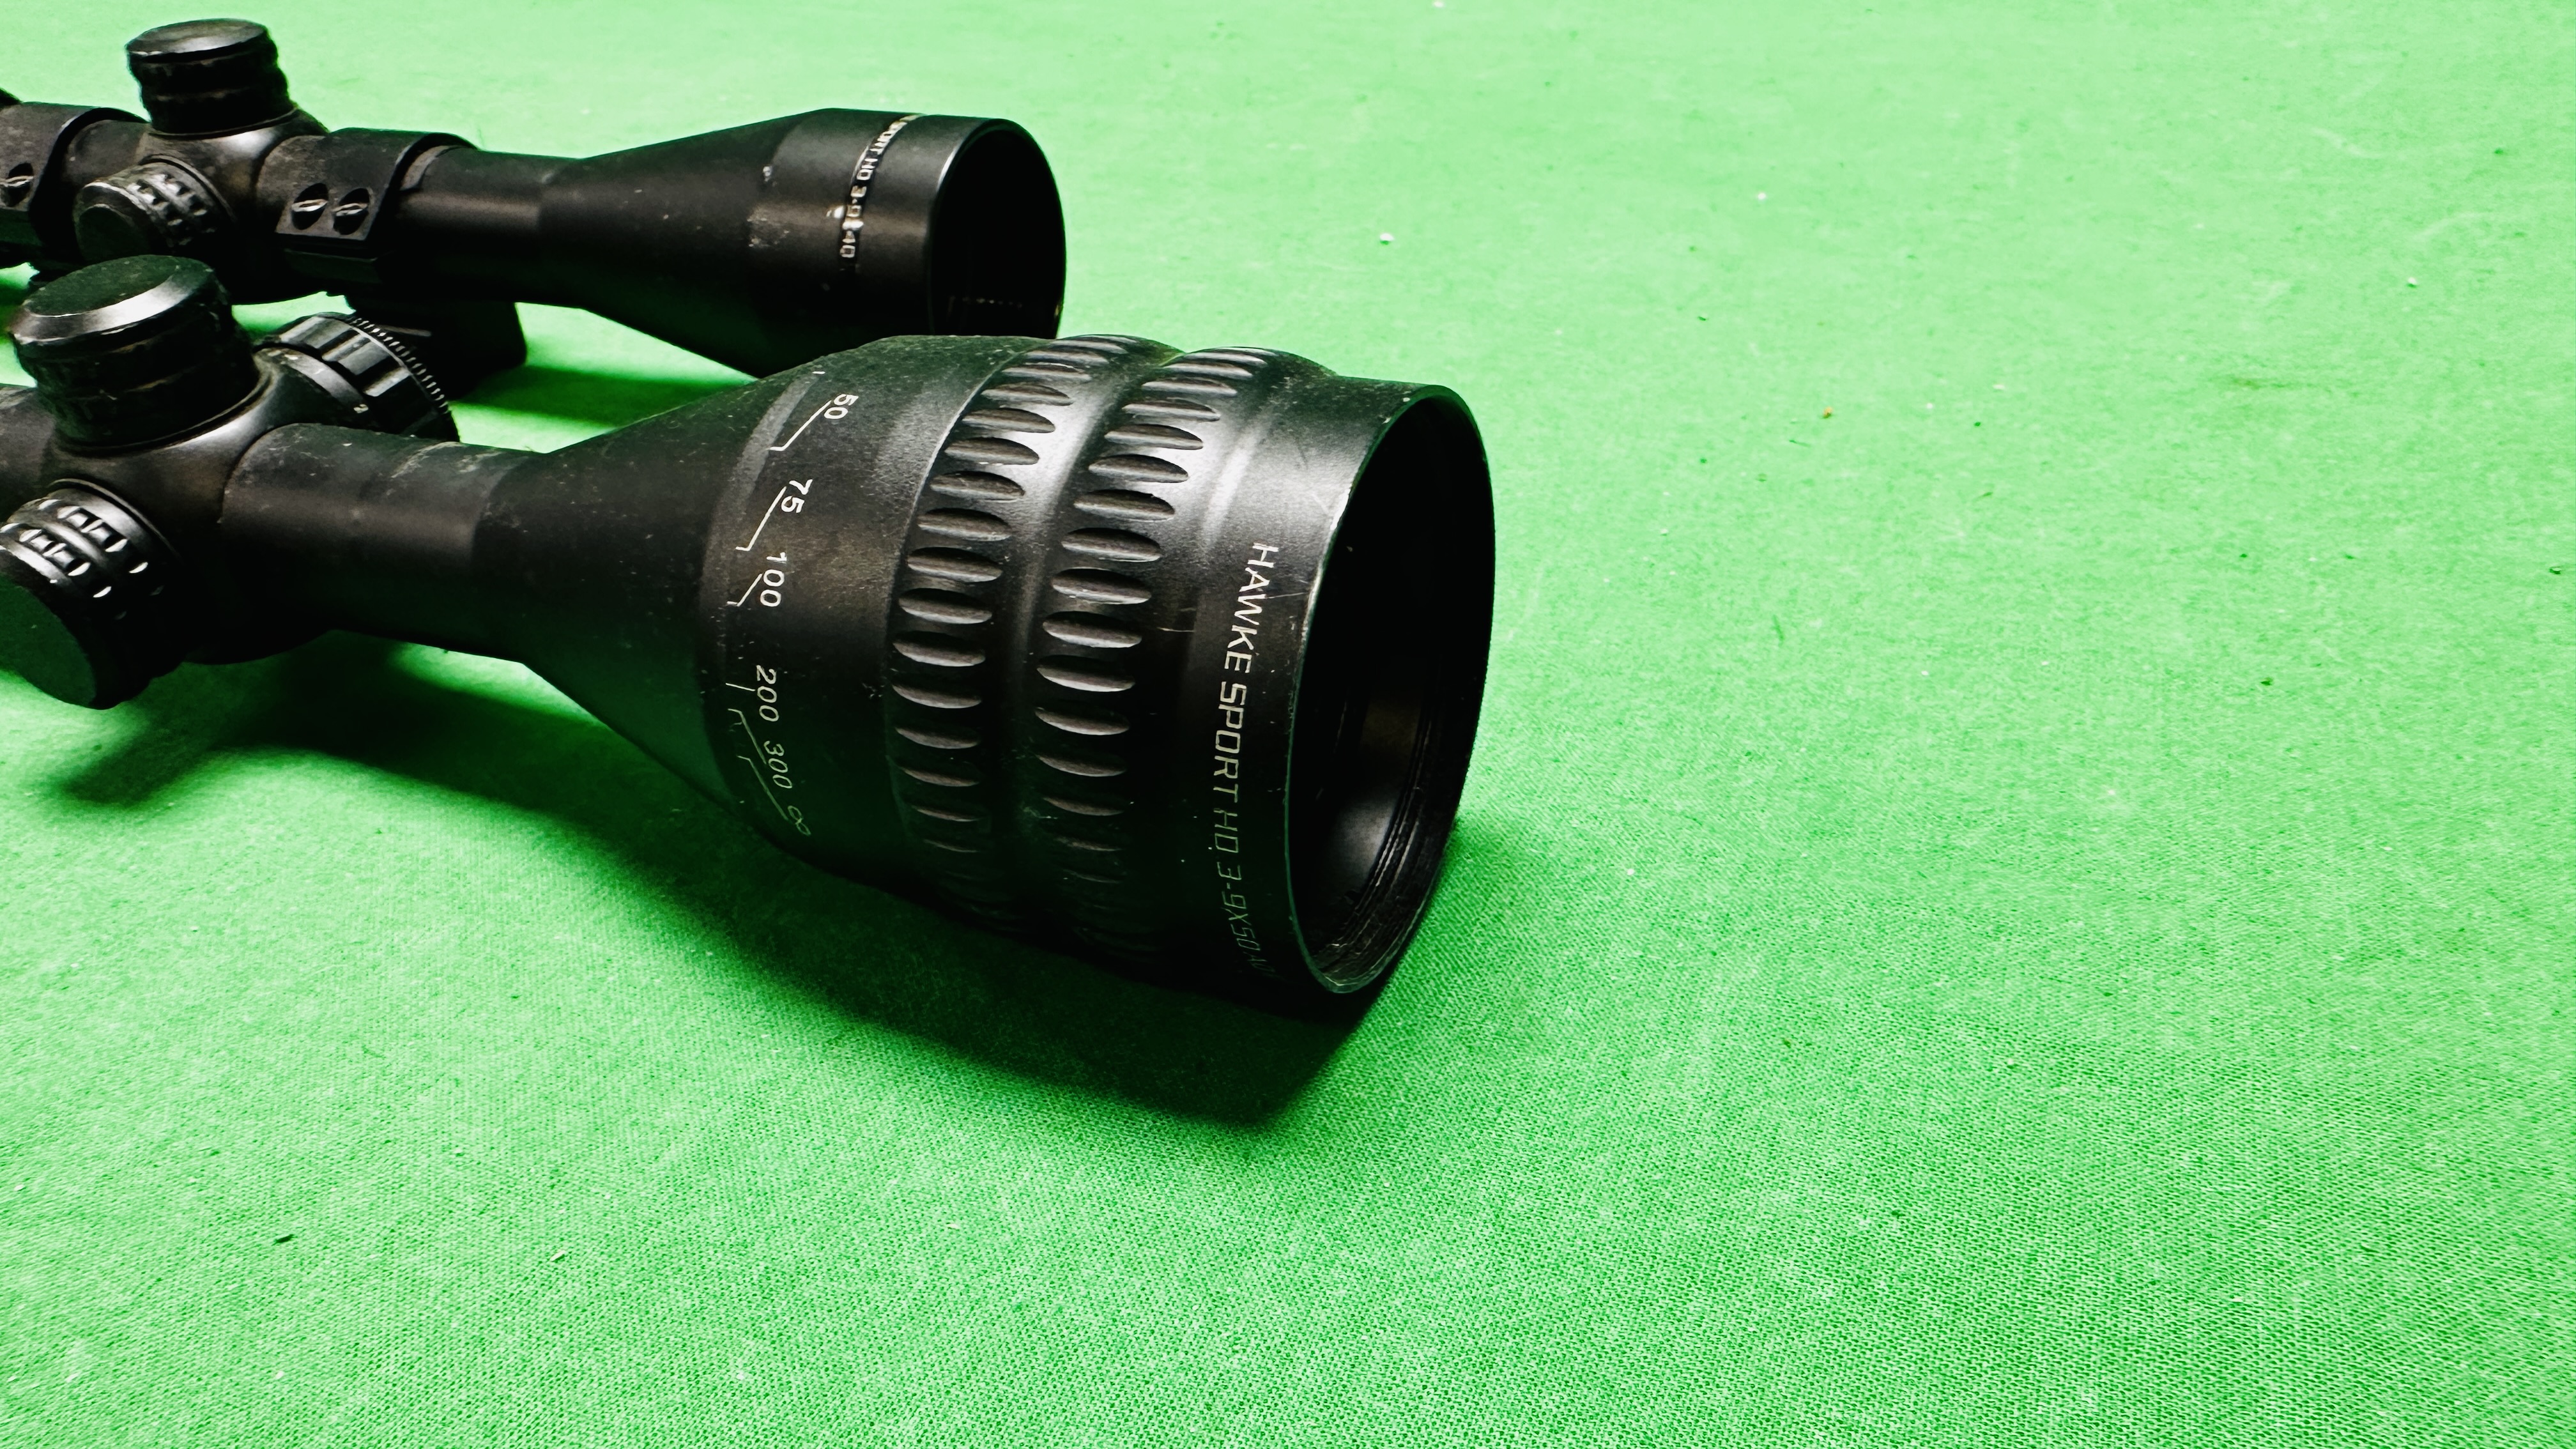 TWO HAWKE RIFLE SCOPES TO INCLUDE SPORT HD 3-9X40 WITH MOUNTS AND SPORT HD 3-9X50 AO MILL DOT IR. - Image 5 of 8